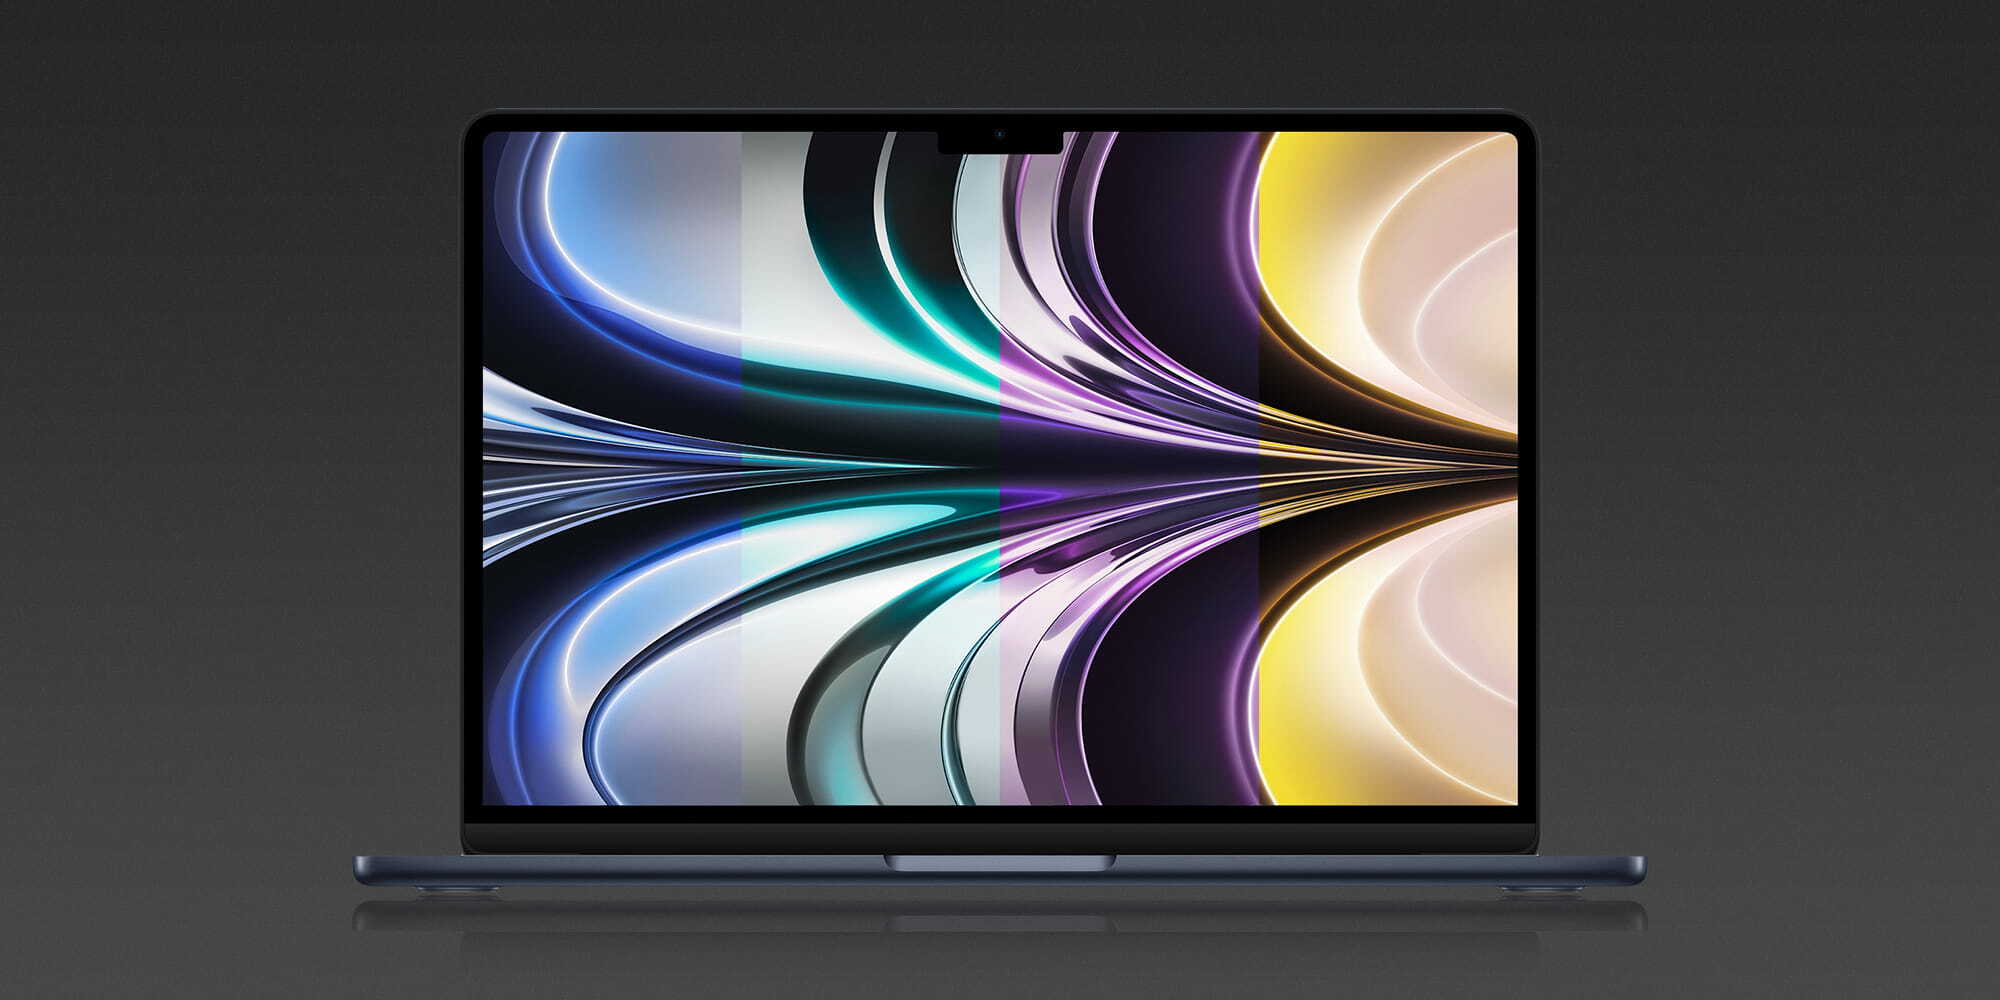 Download the official 2021 MacBook Pro wallpapers here